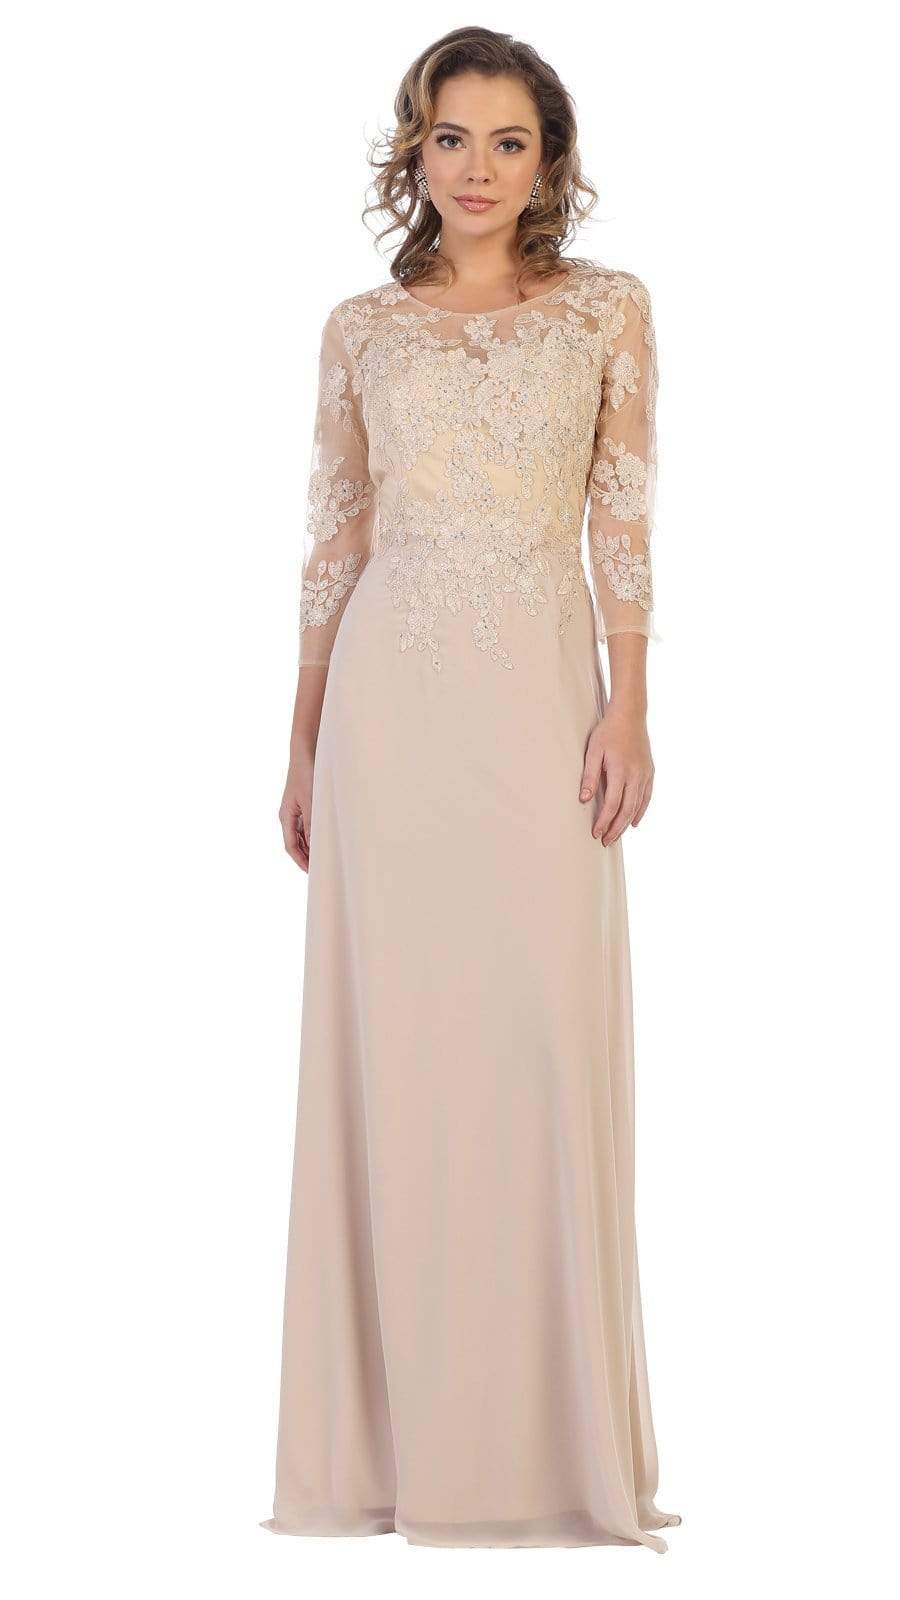 May Queen - MQ1637 Illusion Quarter Sleeve Appliqued Sheath Gown Special Occasion Dress M / Champagne